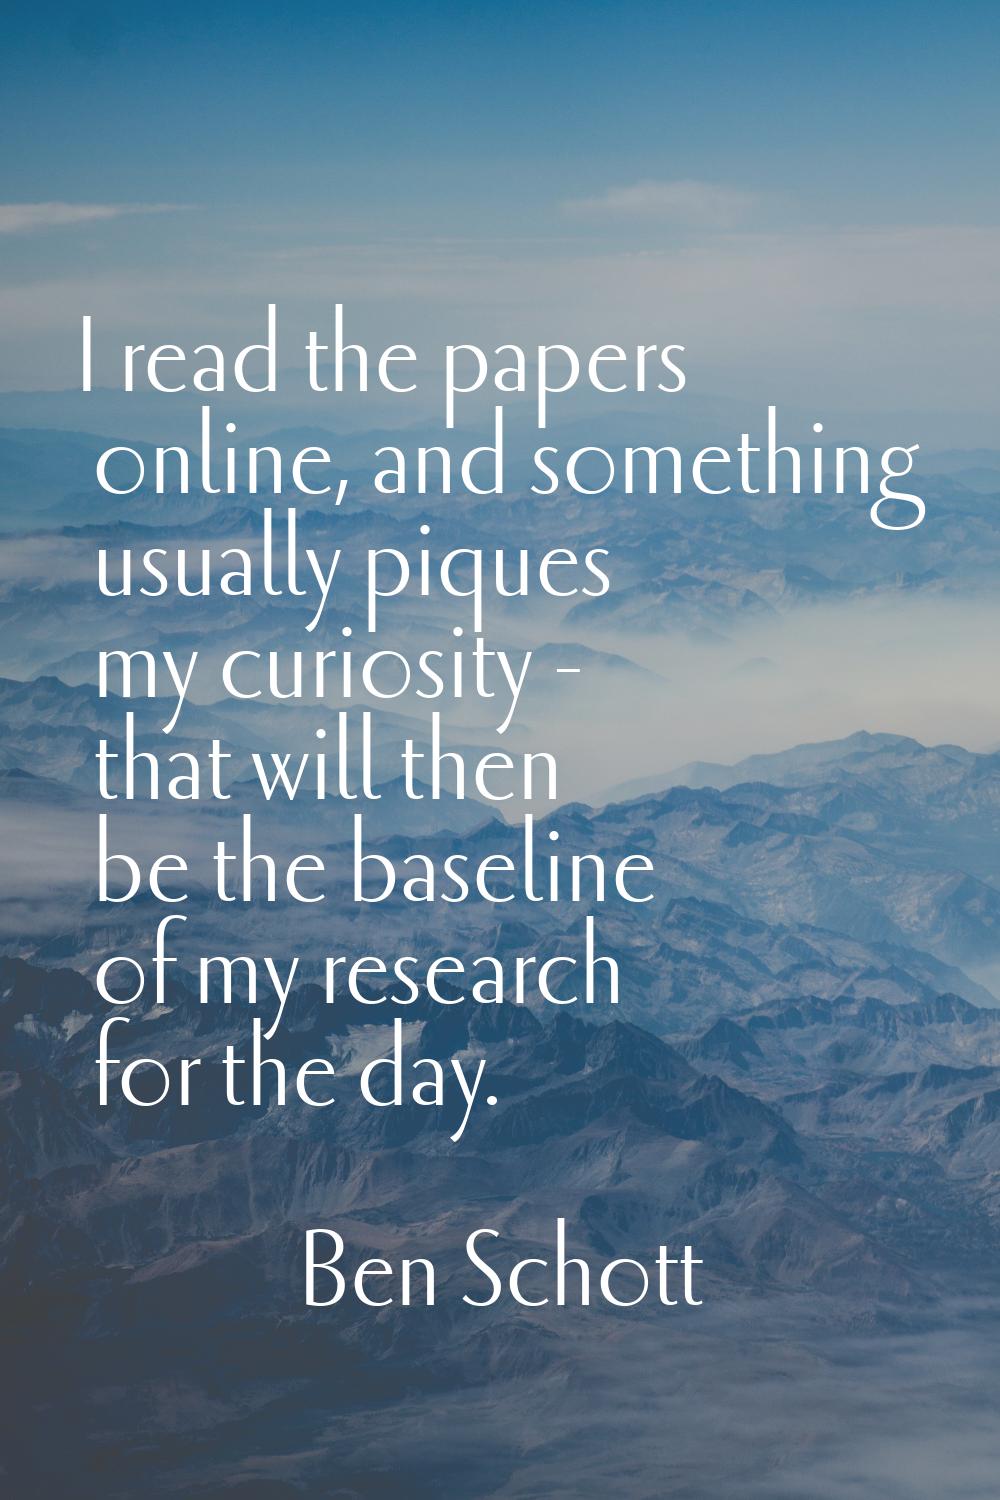 I read the papers online, and something usually piques my curiosity - that will then be the baselin